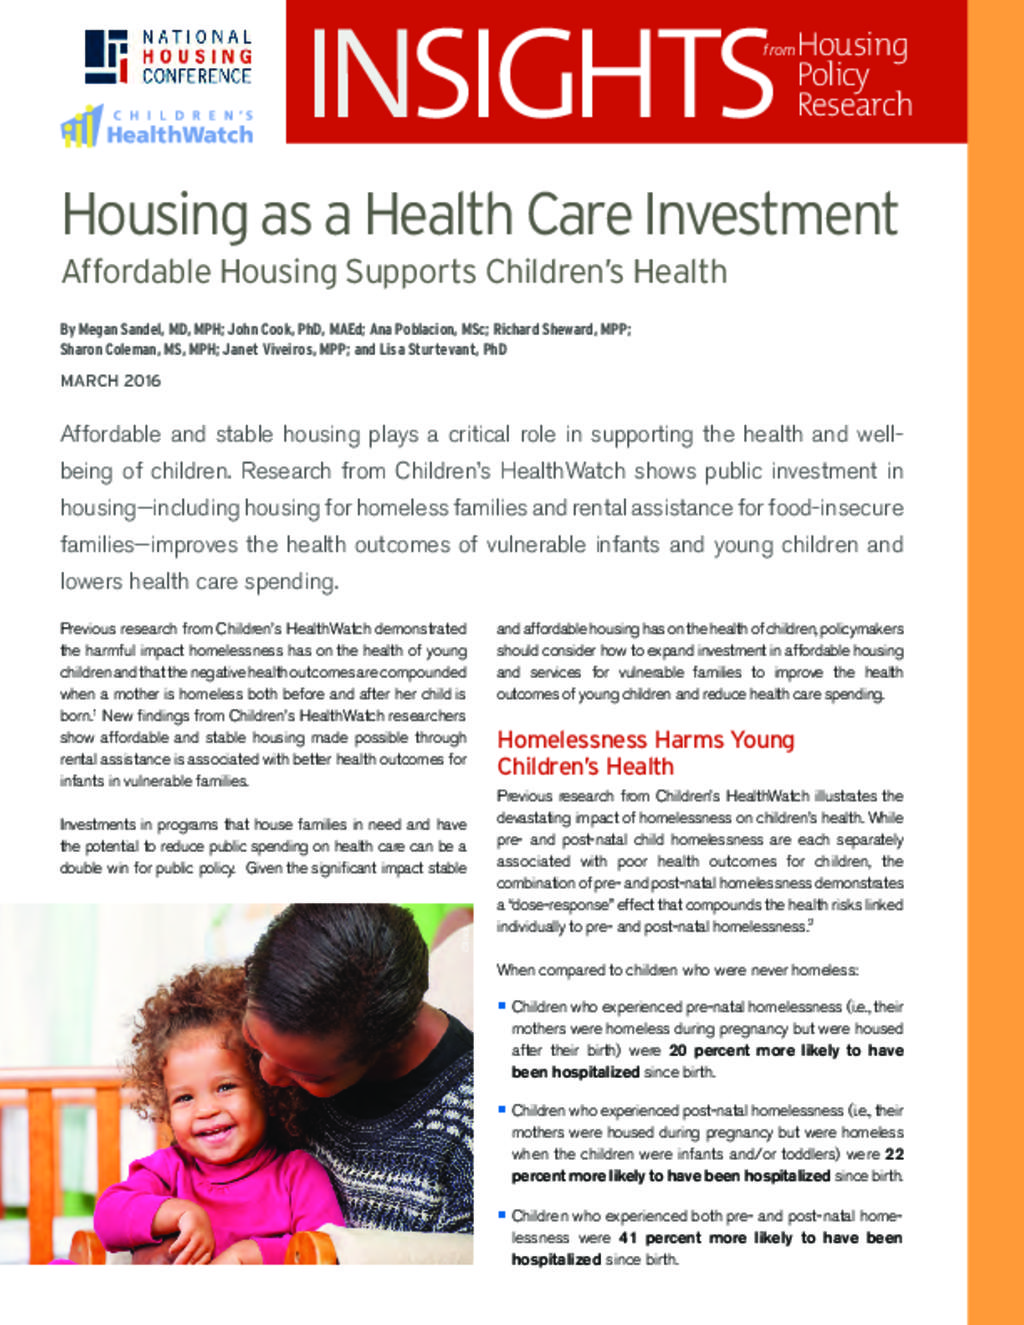 Housing and child health